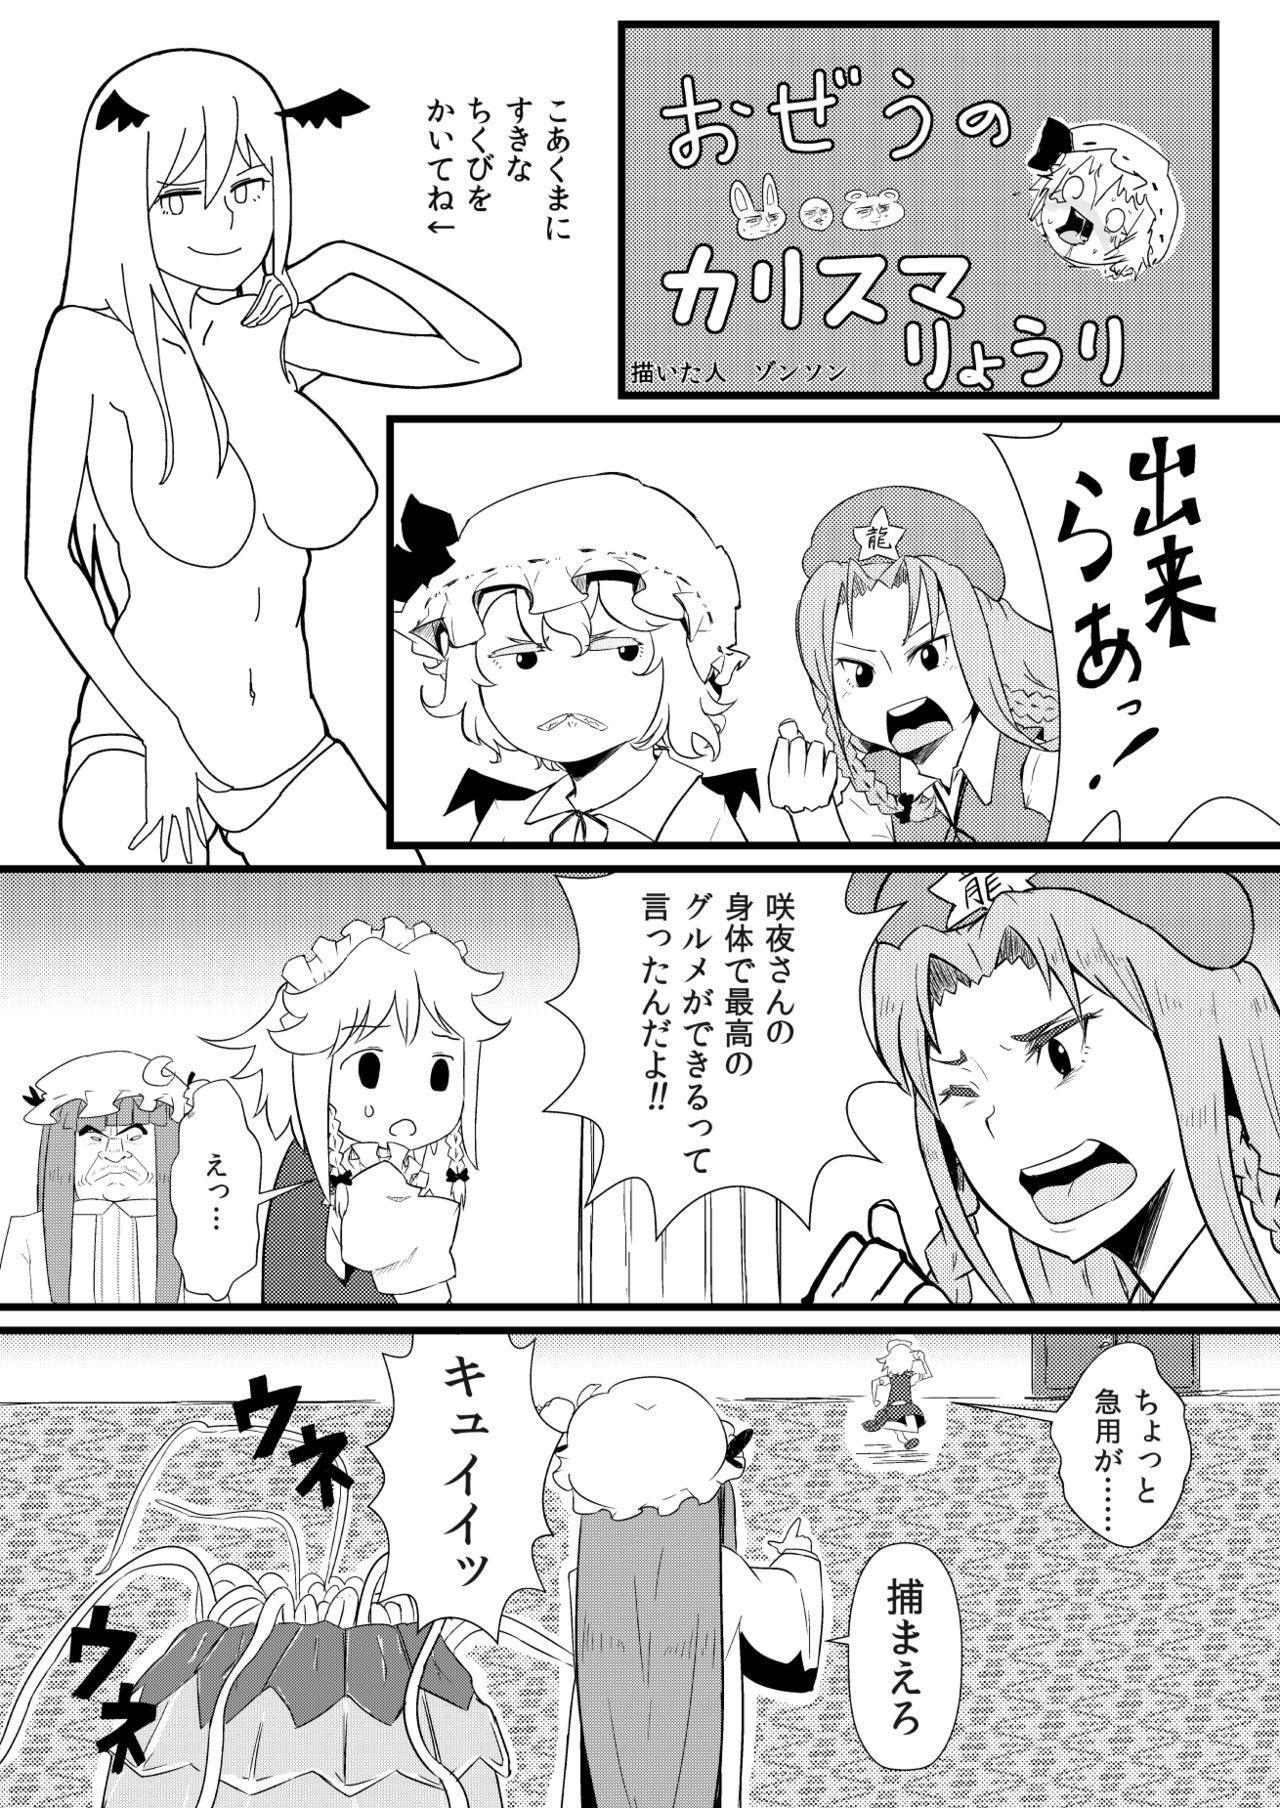 Smalltits 東方板としあき合同誌5 - Touhou project Spain - Page 5